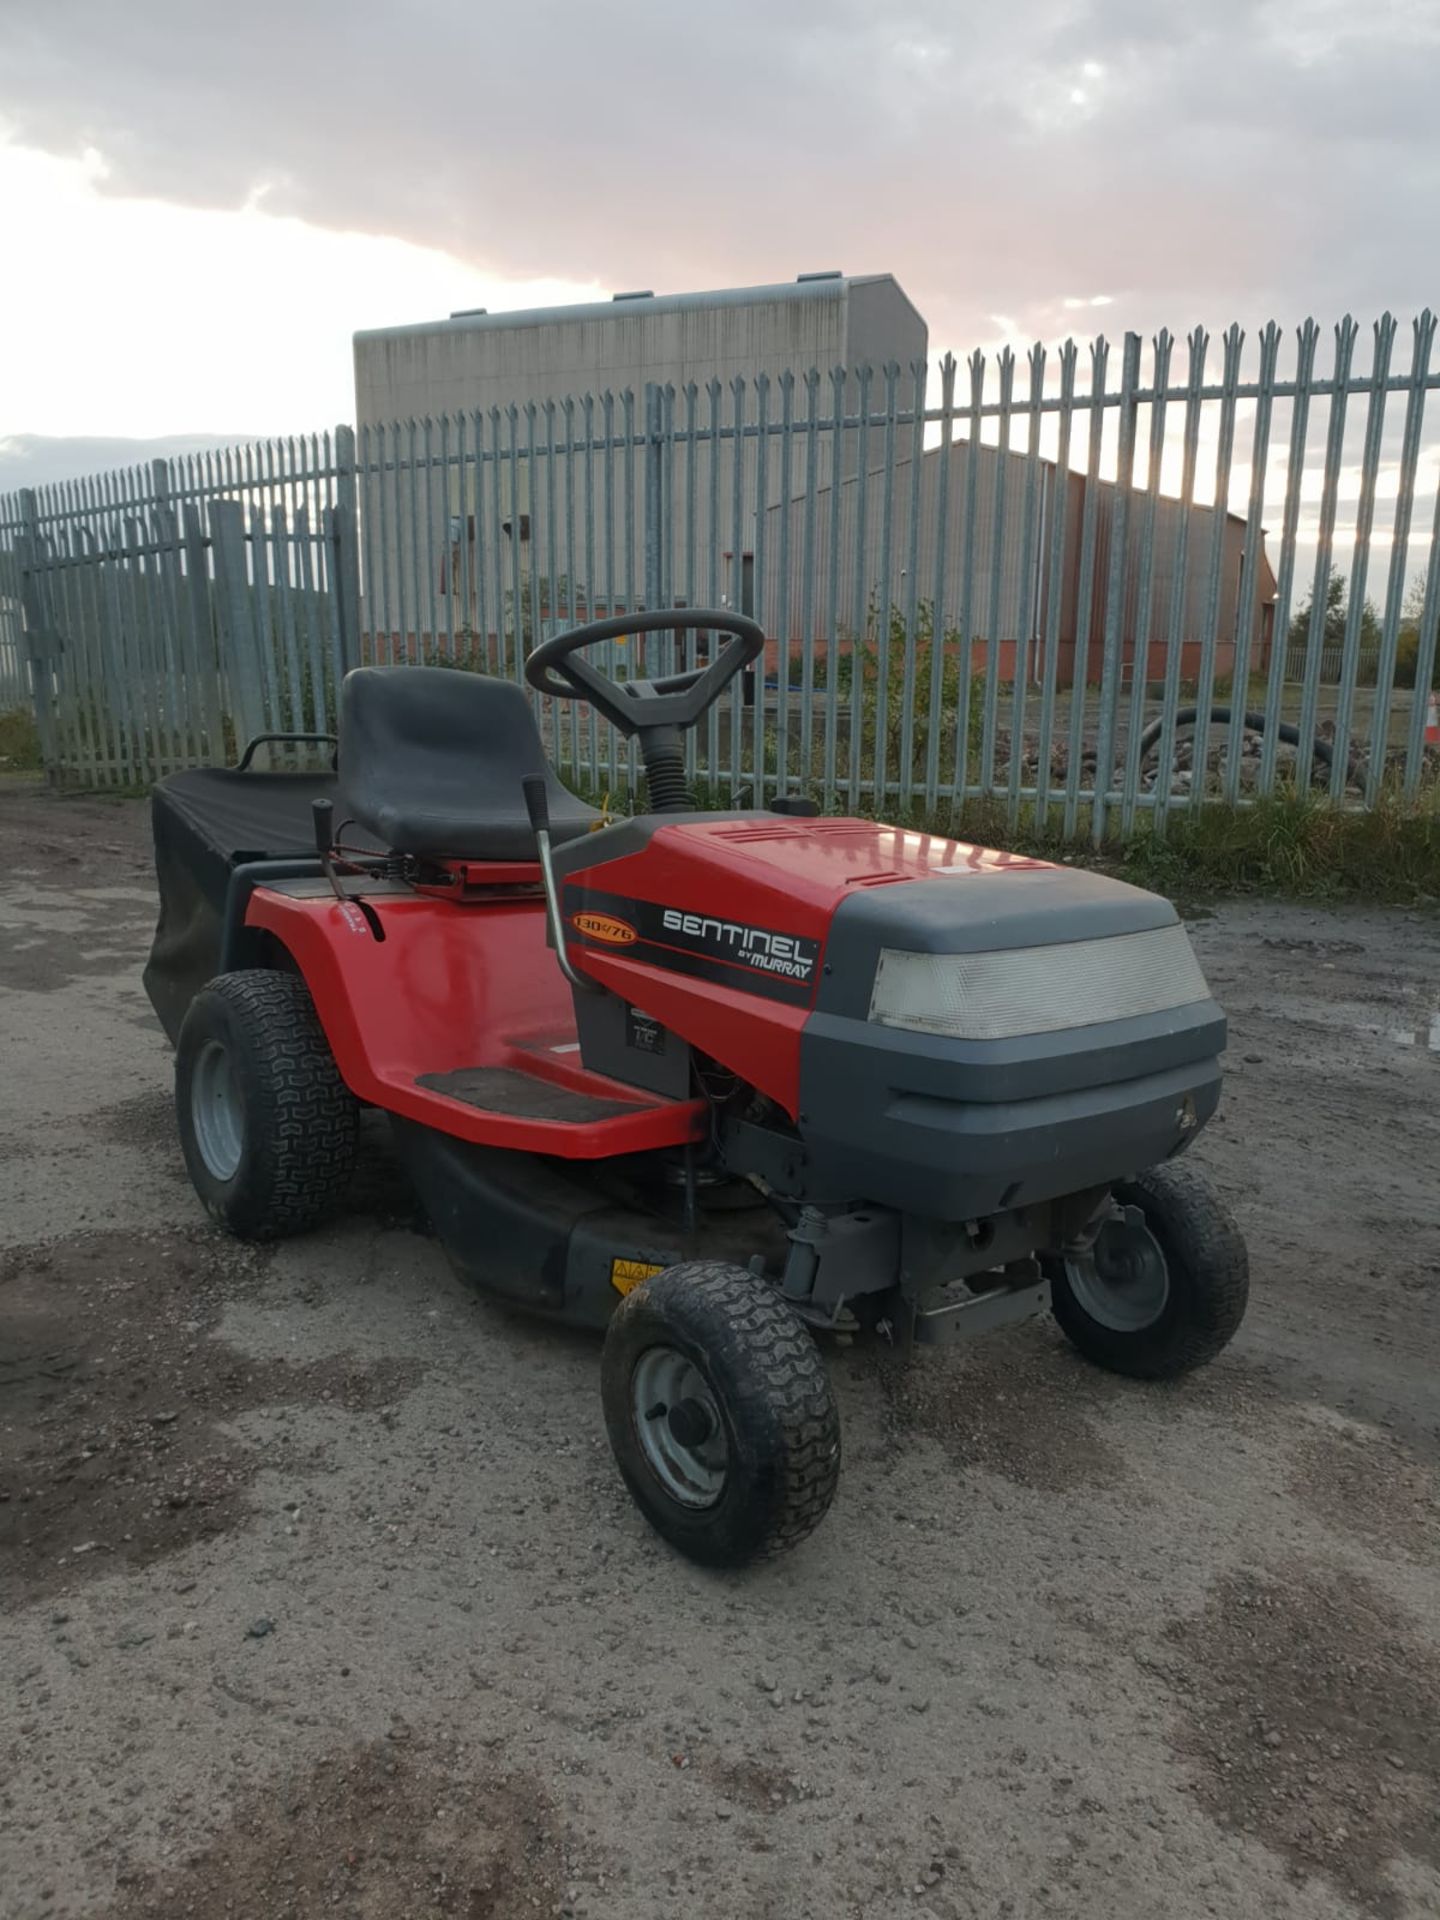 SENTINEL BY MURRAY 130 IC 76 RIDE ON LAWN MOWER WITH COLLECTOR, WORKING ORDER *NO VAT*